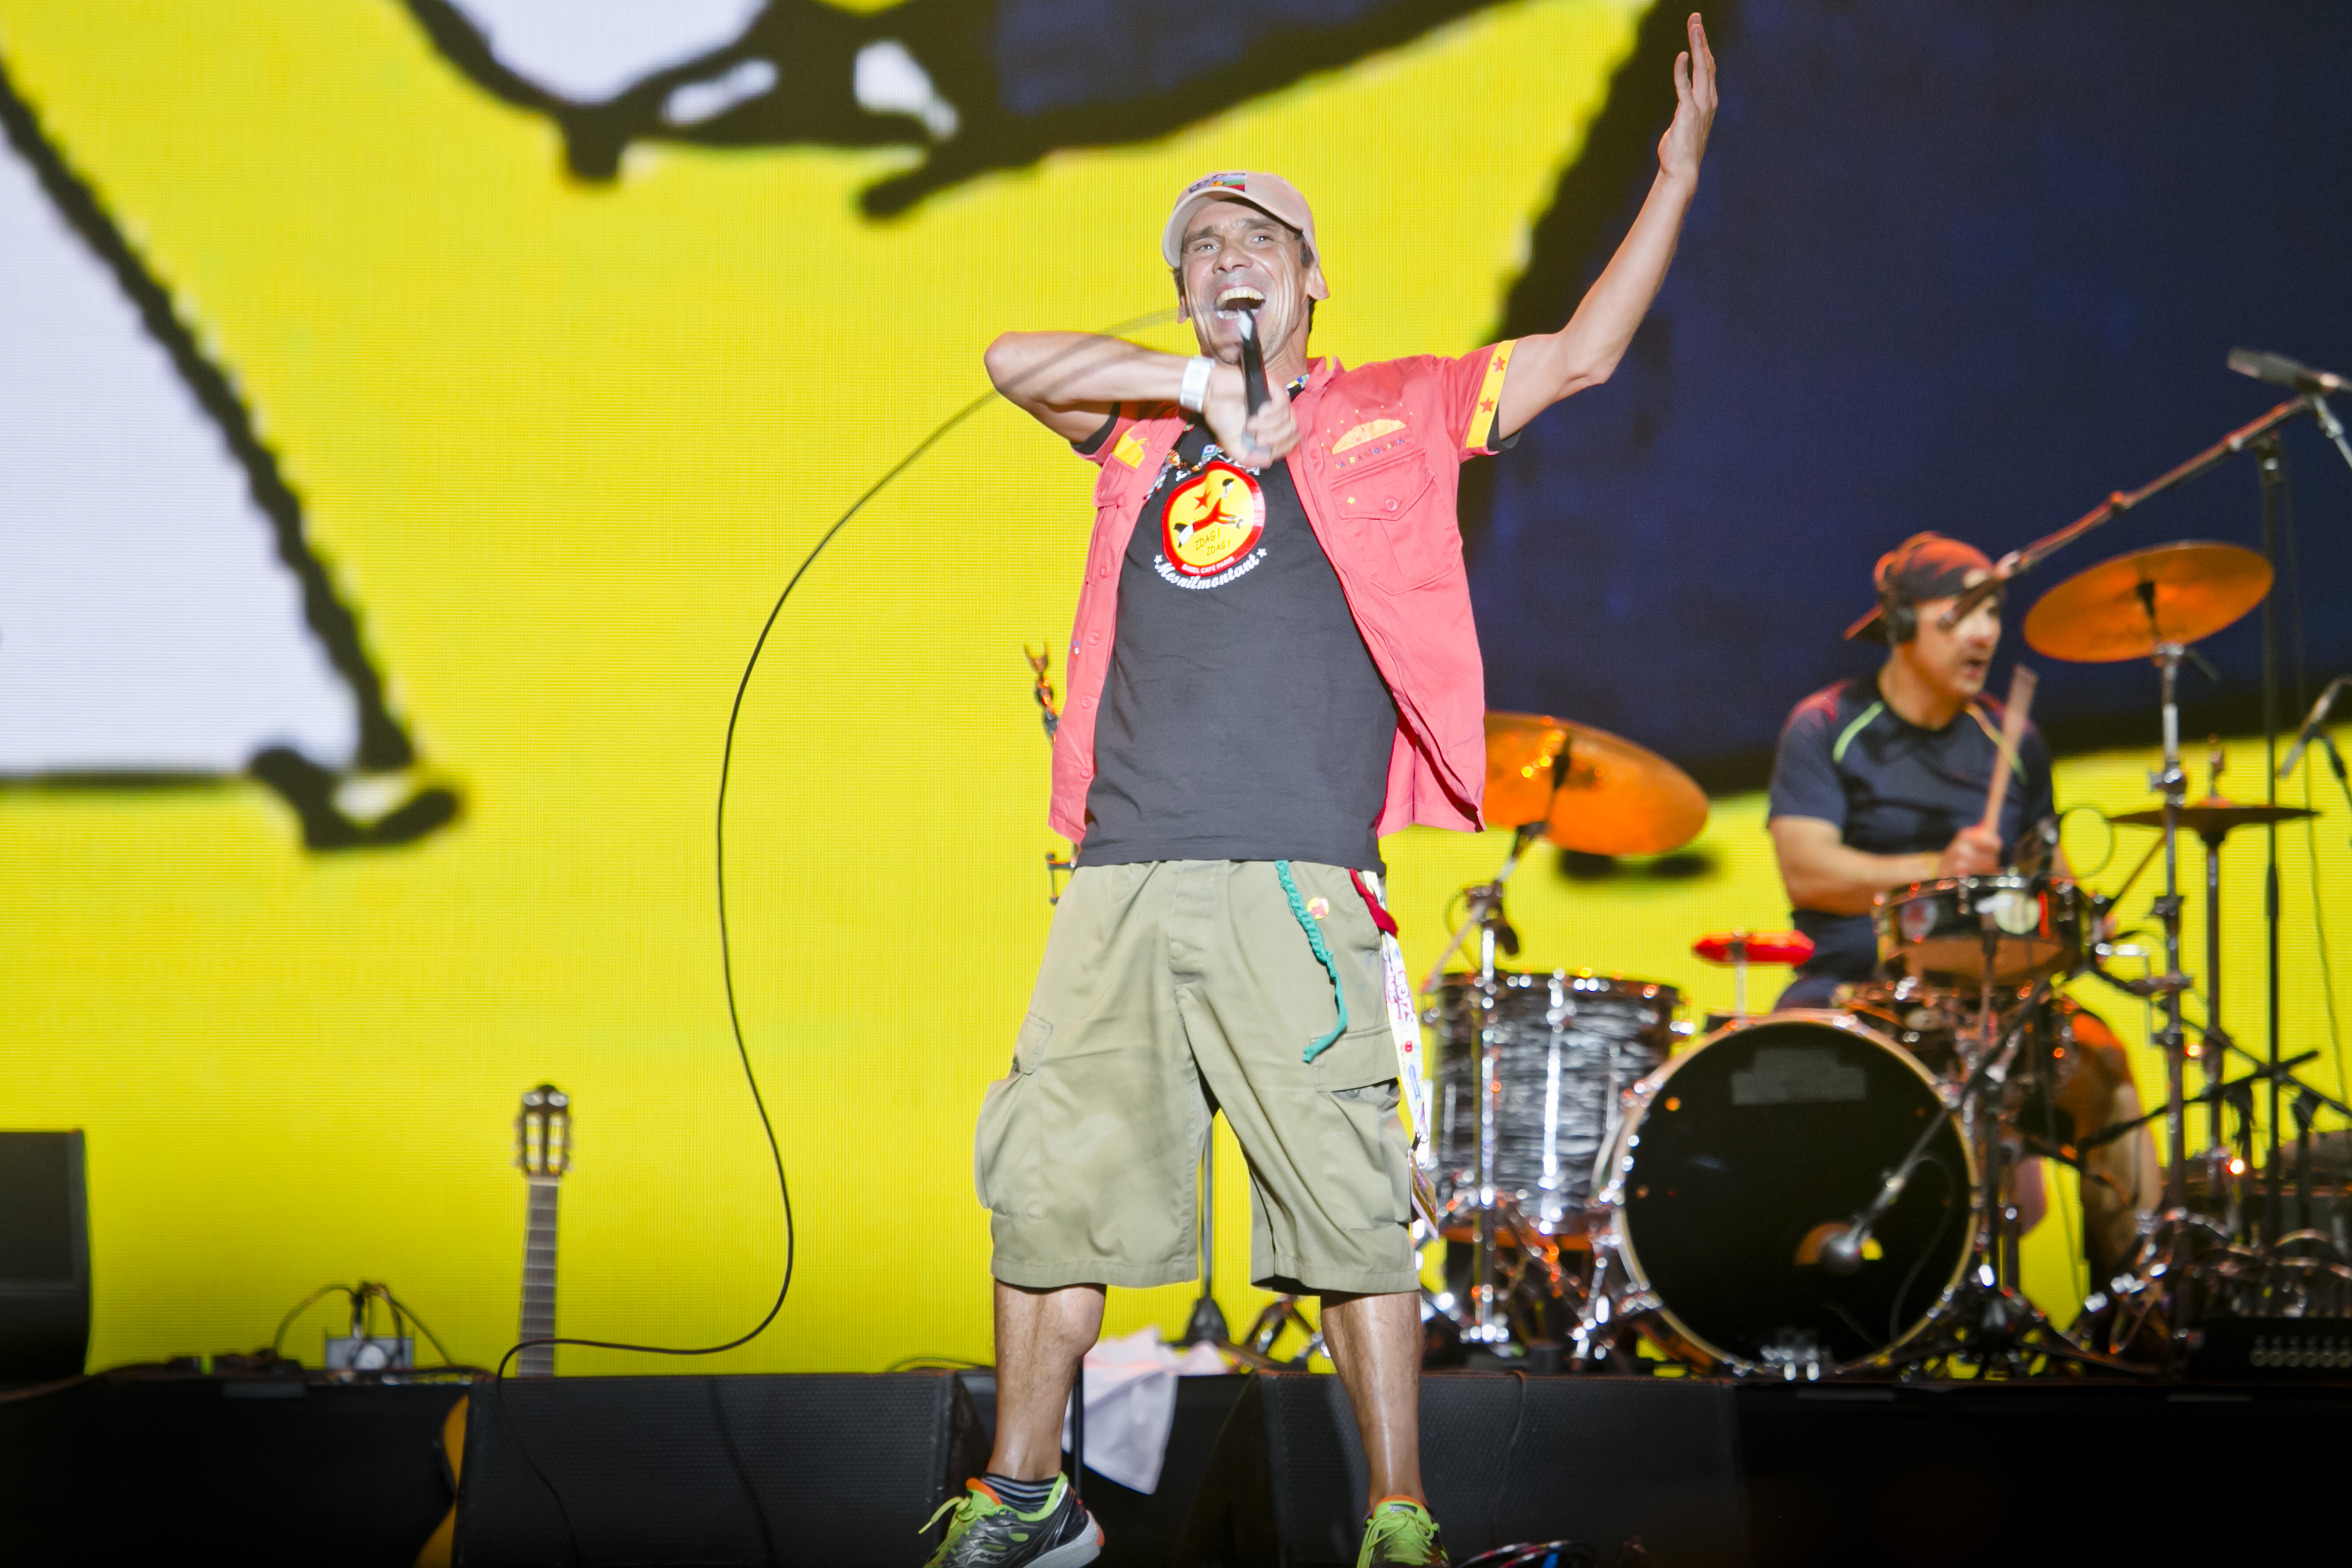 Manu Chao at Sziget Festival, Budapest, Hungary - 12 August 2016